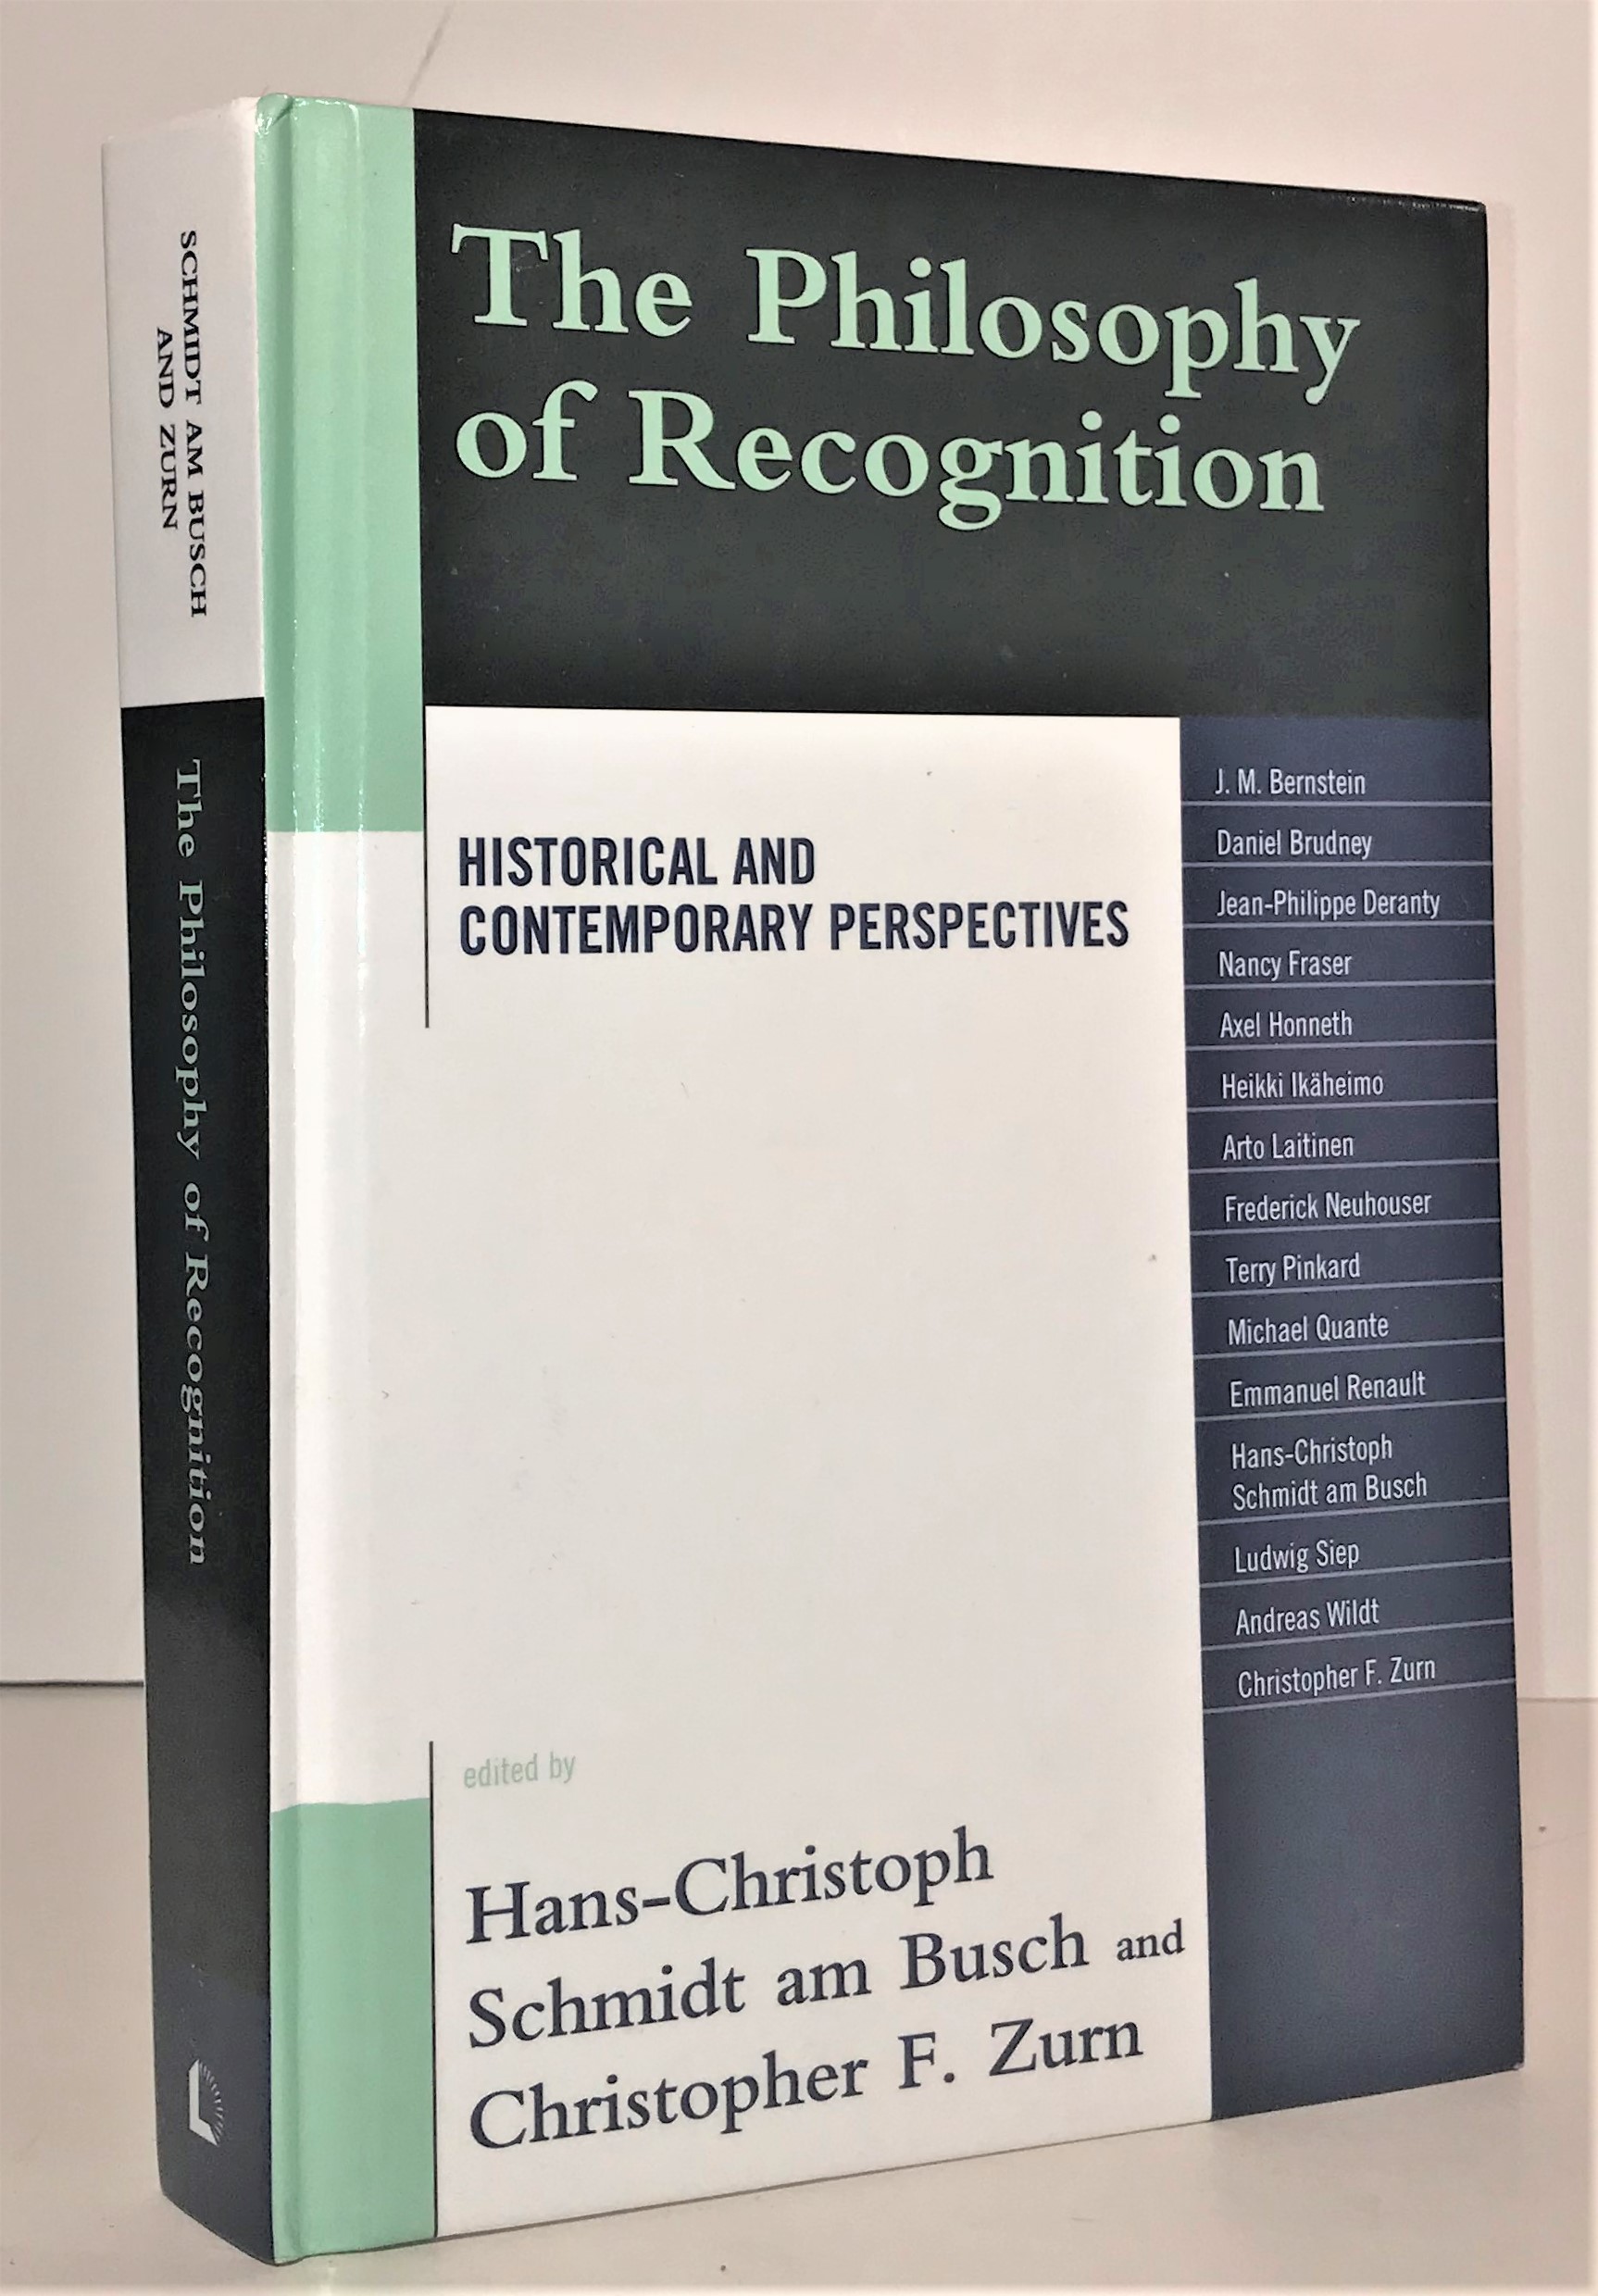 The Philosophy of Recognition: Historical and Contemporary Perspectives - Schmidt Am Busch, Hans-Christoph and Christopher F. Zurn (Edited by)